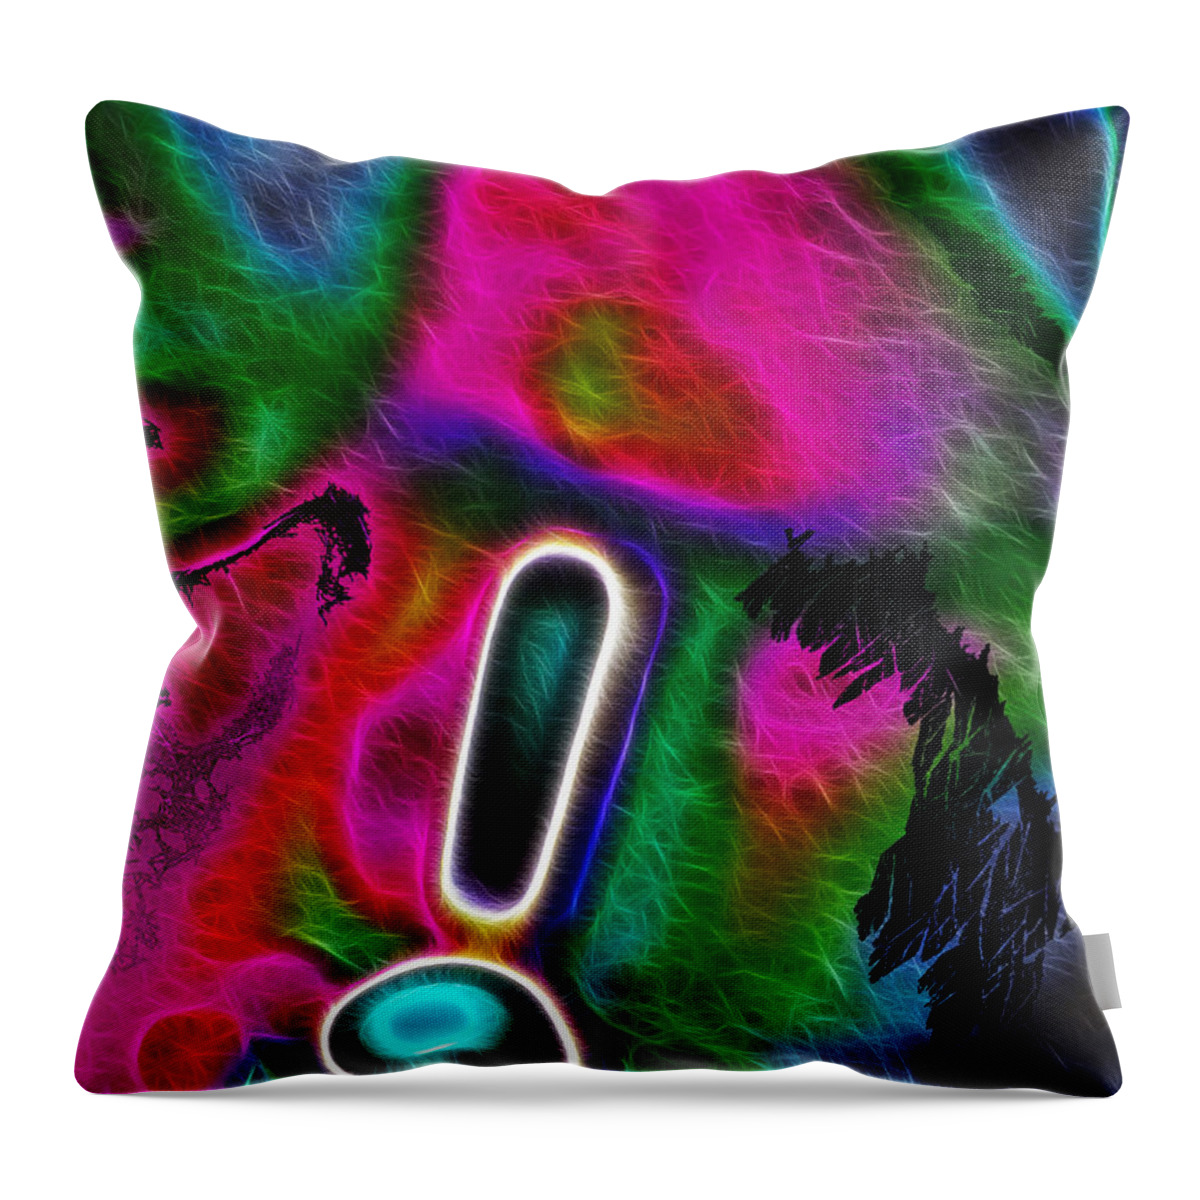 Exclamation Mark Throw Pillow featuring the digital art Exclamation Mark by Maciek Froncisz